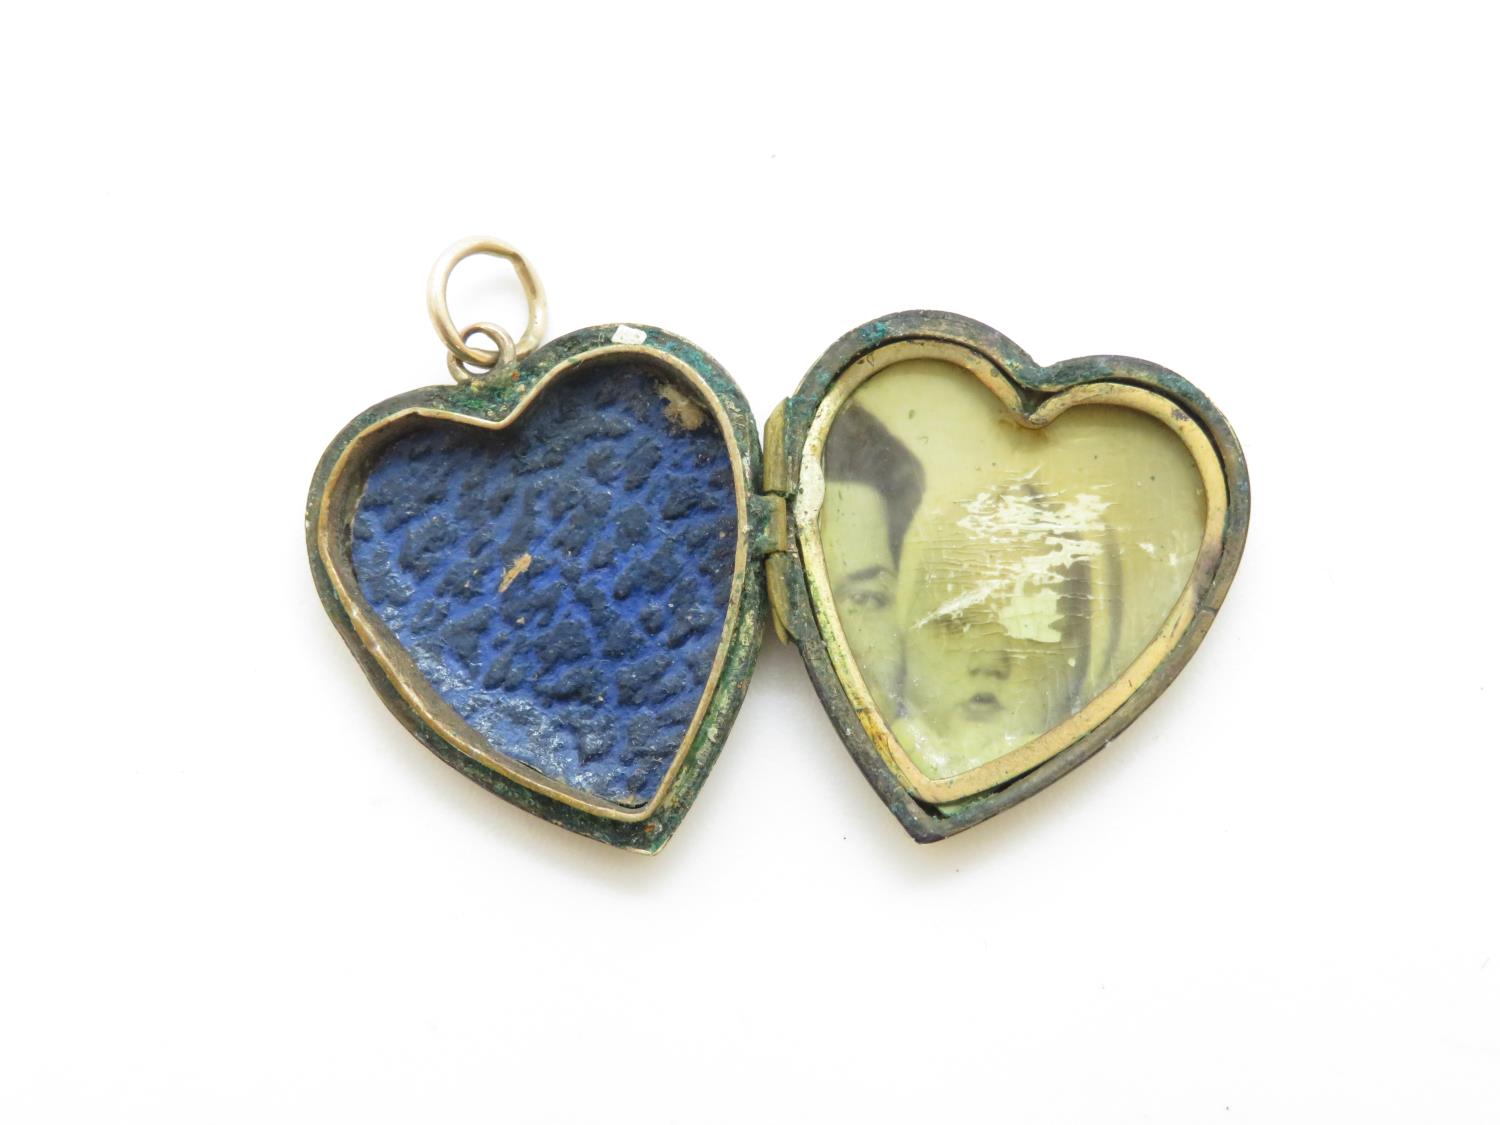 Back and front 9ct gold locket 3.8g - Image 2 of 3